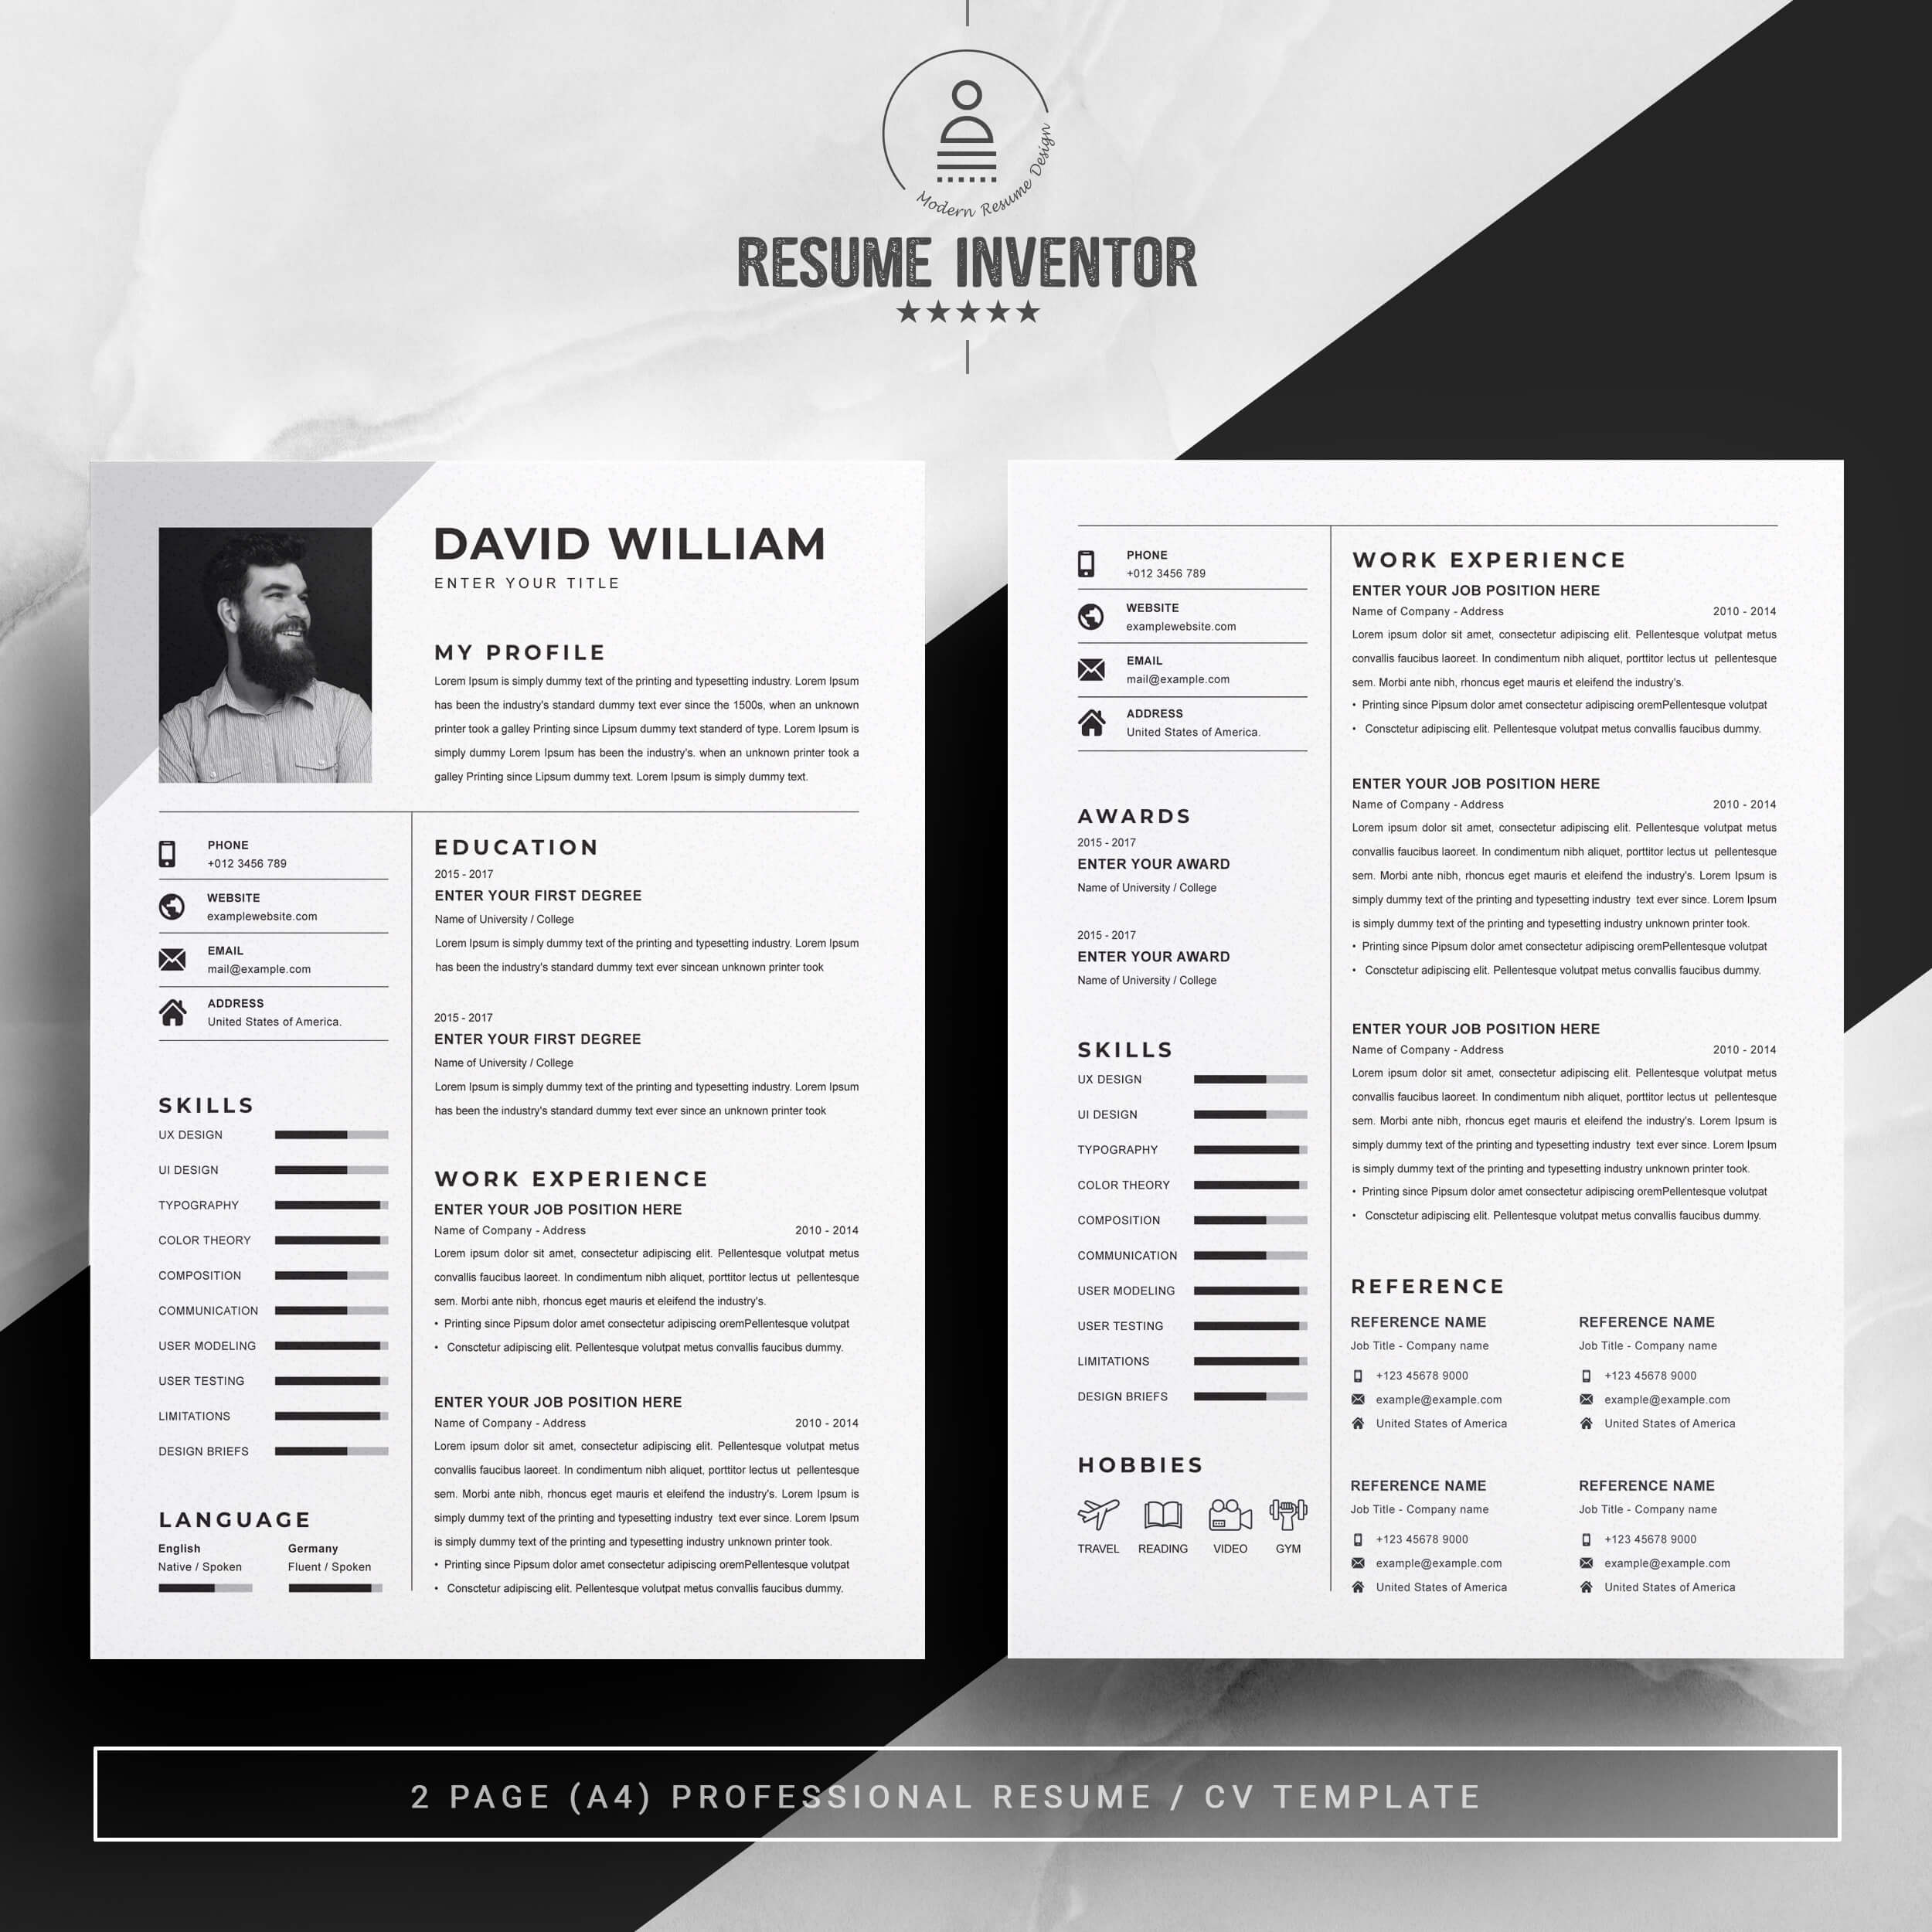 Professional Resume Template for Web designers | CV Template Design preview image.